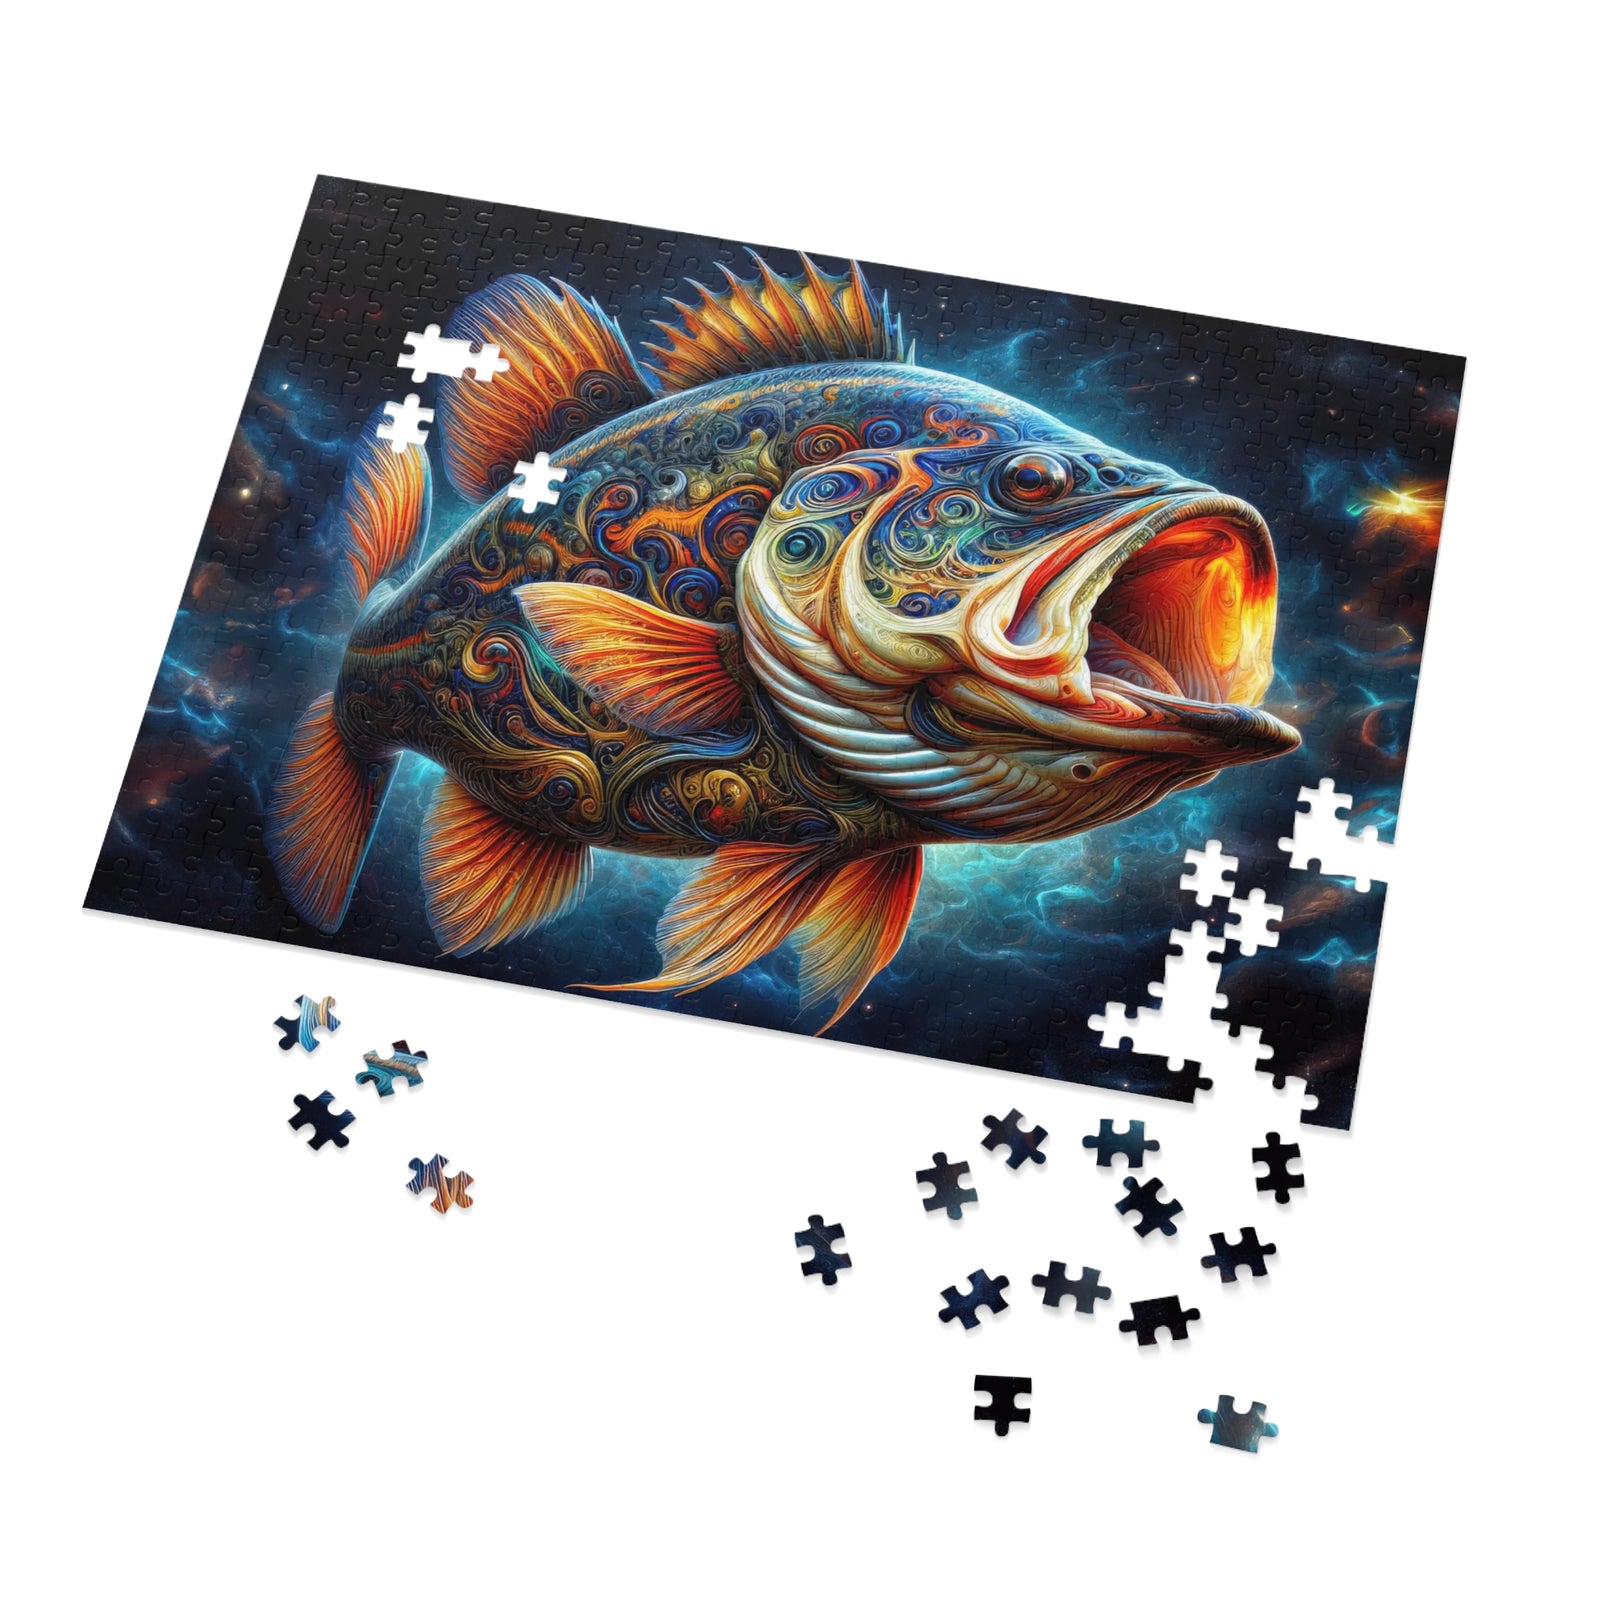 Celestial Voyager Jigsaw Puzzle